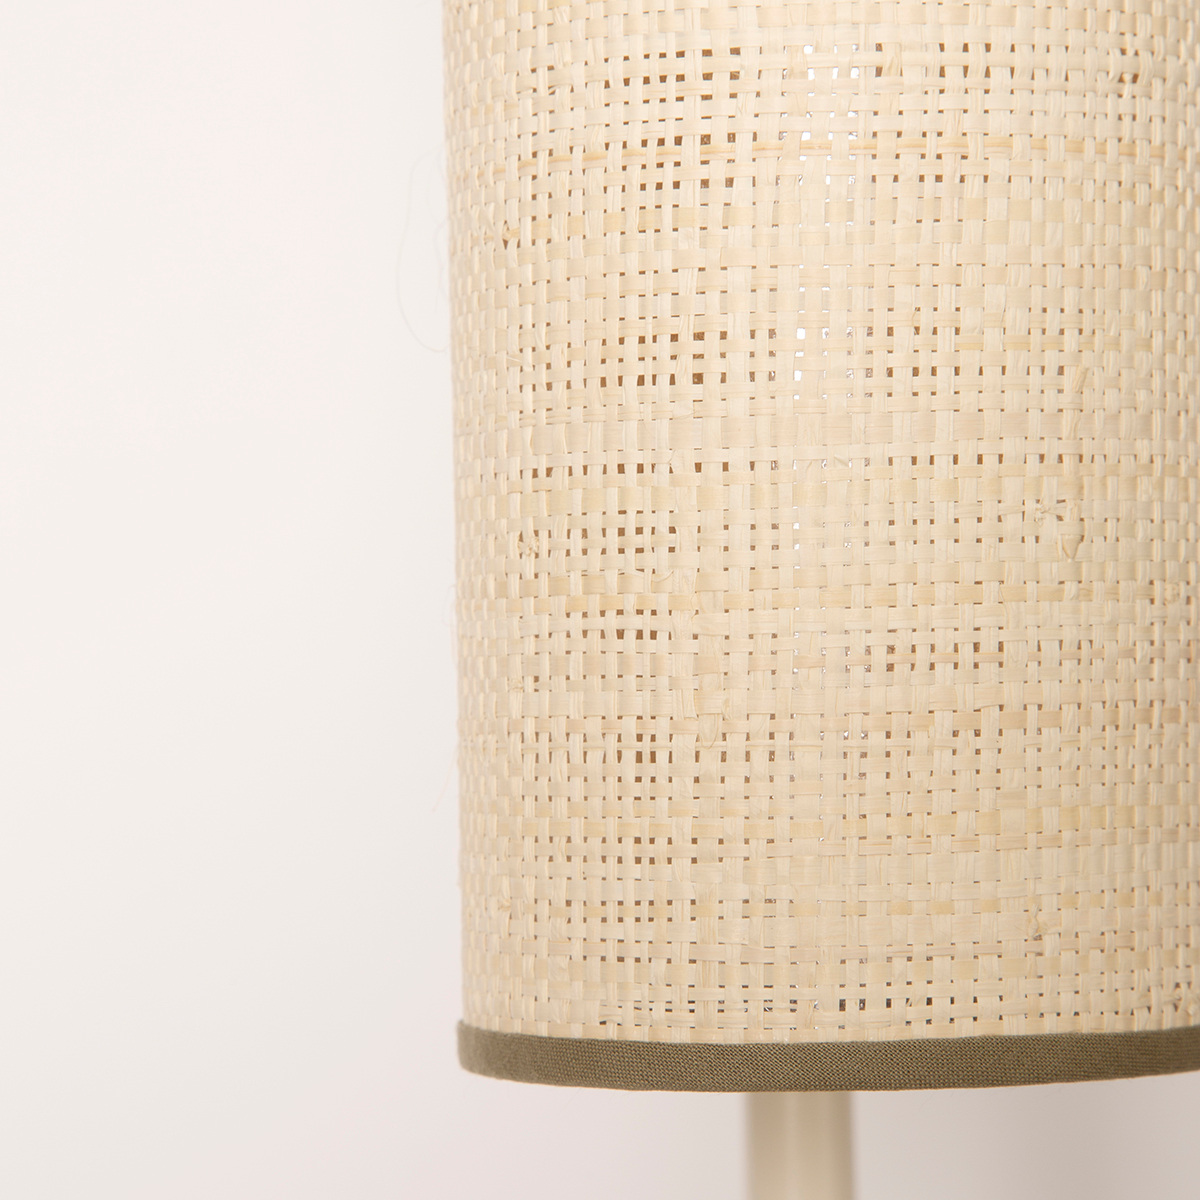 Table Lamp Tokyo, White - H43 cm - Steel / Cotton shade - image 2